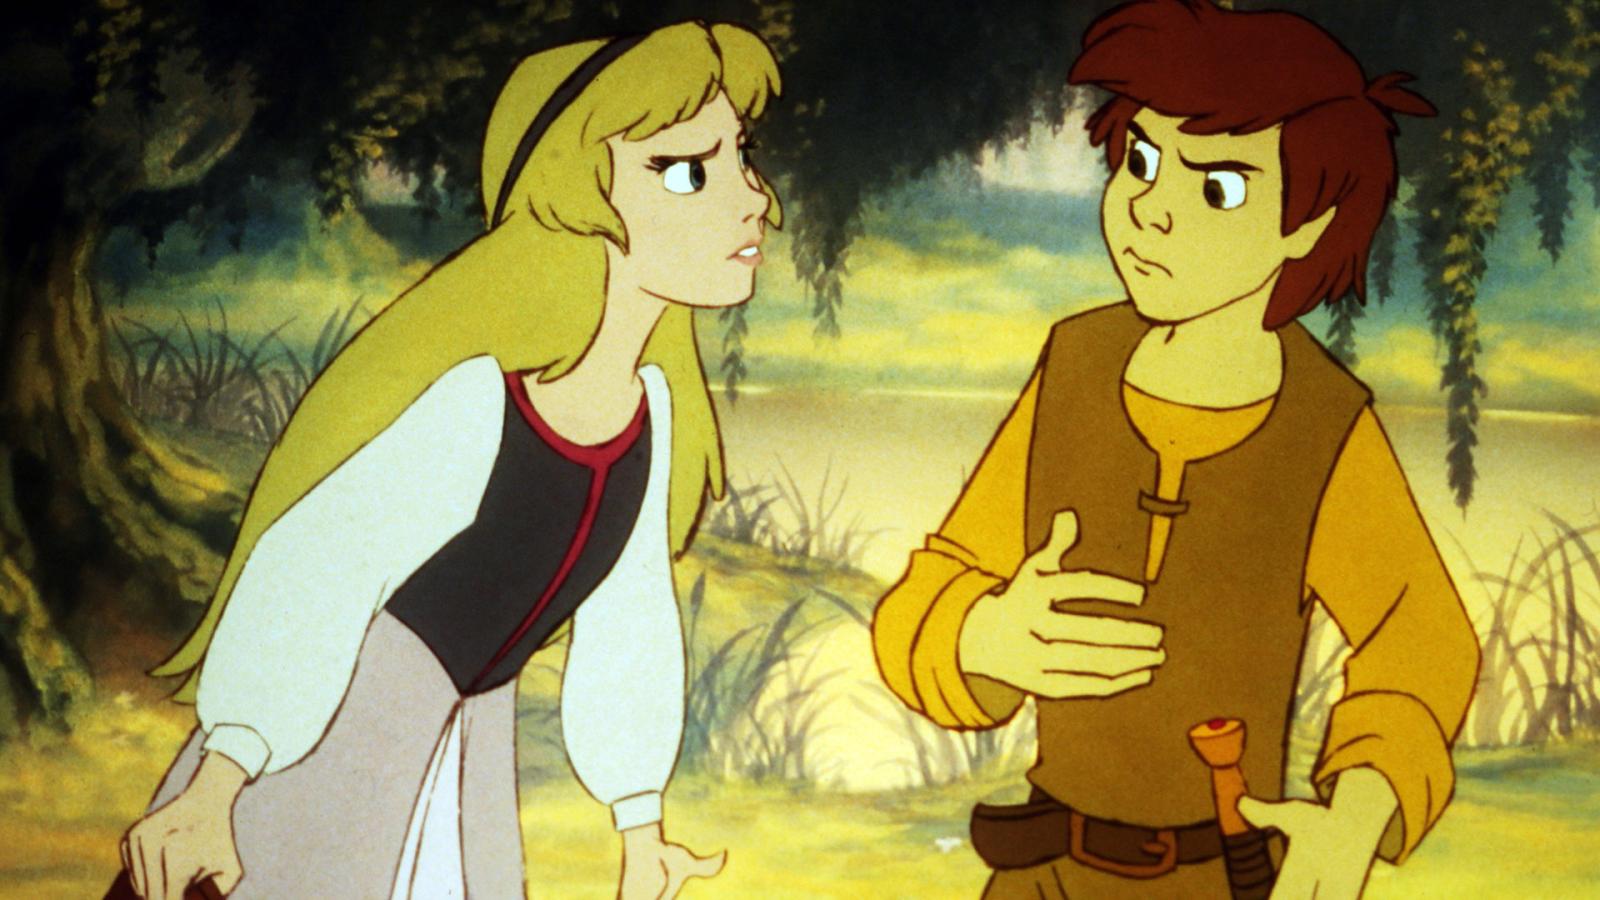 14 Underrated Animated Movies of the 1980s Worth Revisiting - image 3